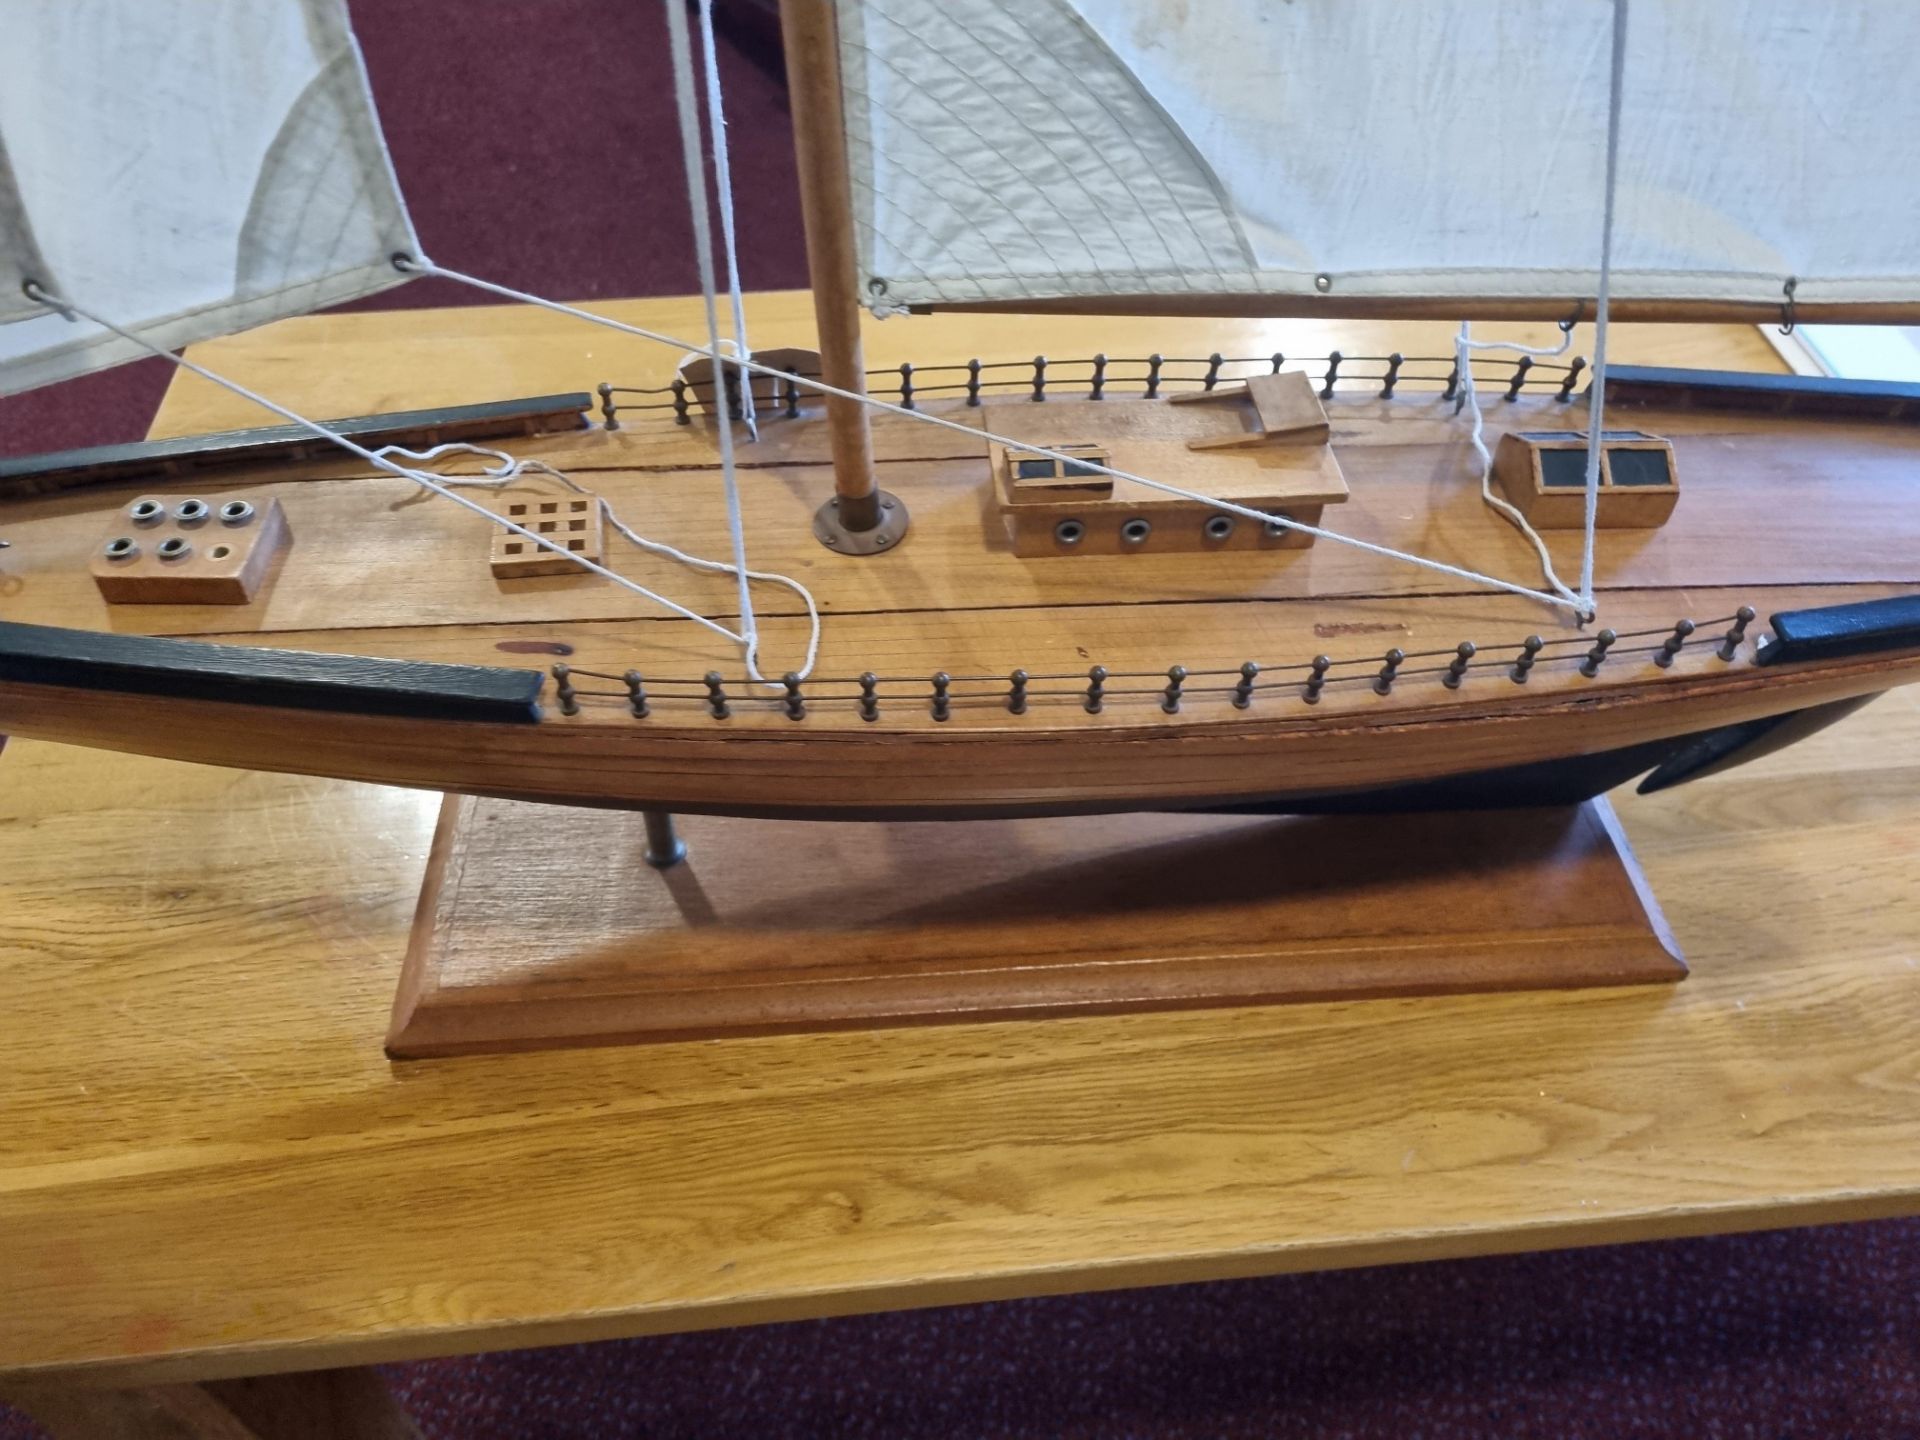 Wooden Model Of A Sailing Boat W 1100mm D 160mm H 1100mm - Image 7 of 7